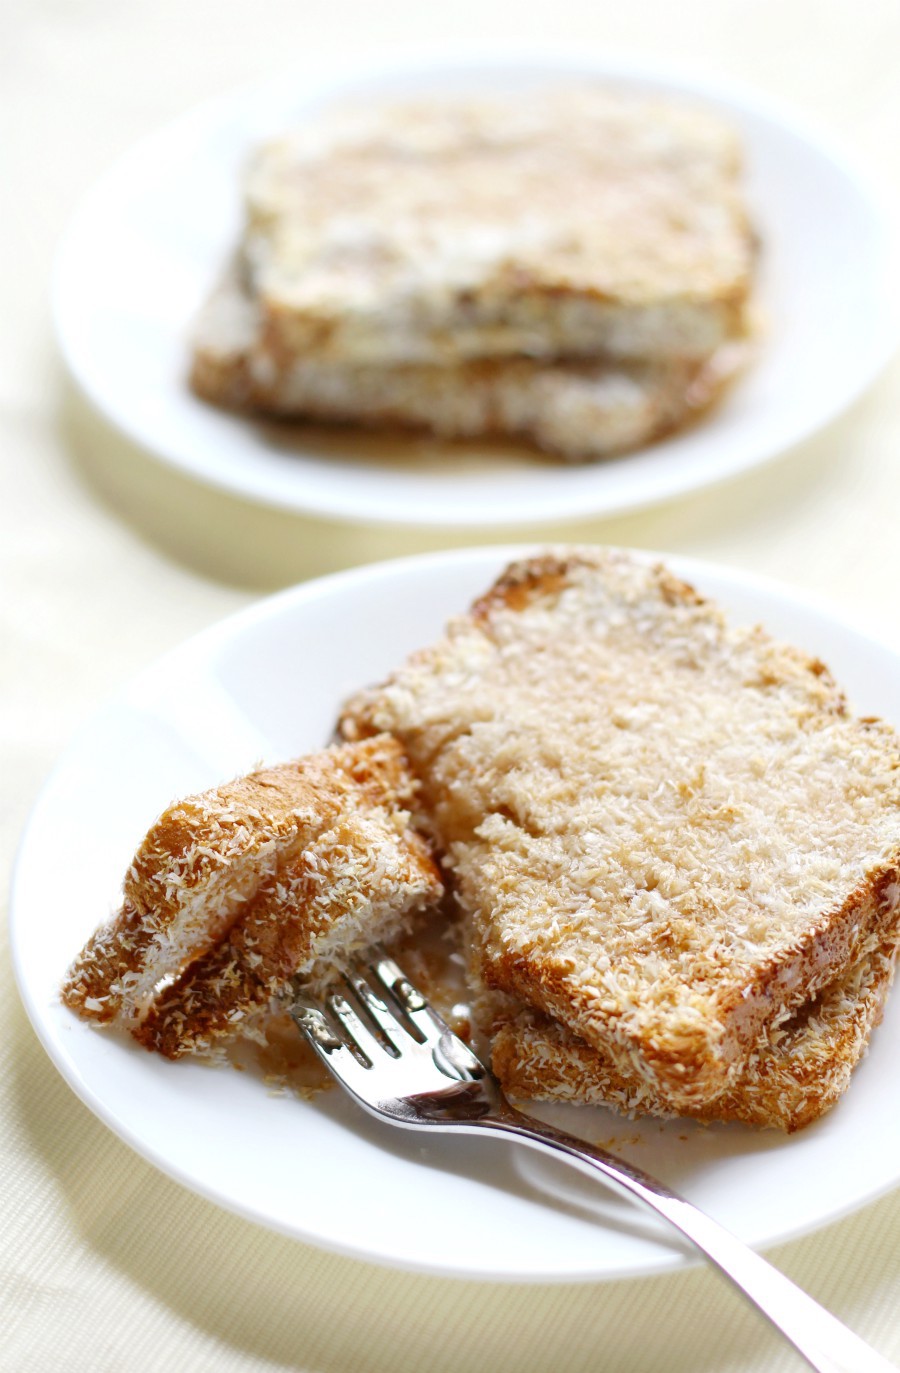 Air Fryer Toasted Coconut French Toast (Gluten-Free, Vegan) | Strength and Sunshine @RebeccaGF666 The healthiest way to make French toast for breakfast! Air Fryer Toasted Coconut French Toast made without the oil and is a gluten-free, vegan, & top 8 allergy-free recipe you'll love! No soggy bread and only 4 ingredients to crisp coconut perfection! #frenchtoast #breakfast #airfryer #glutenfree #vegan #coconut